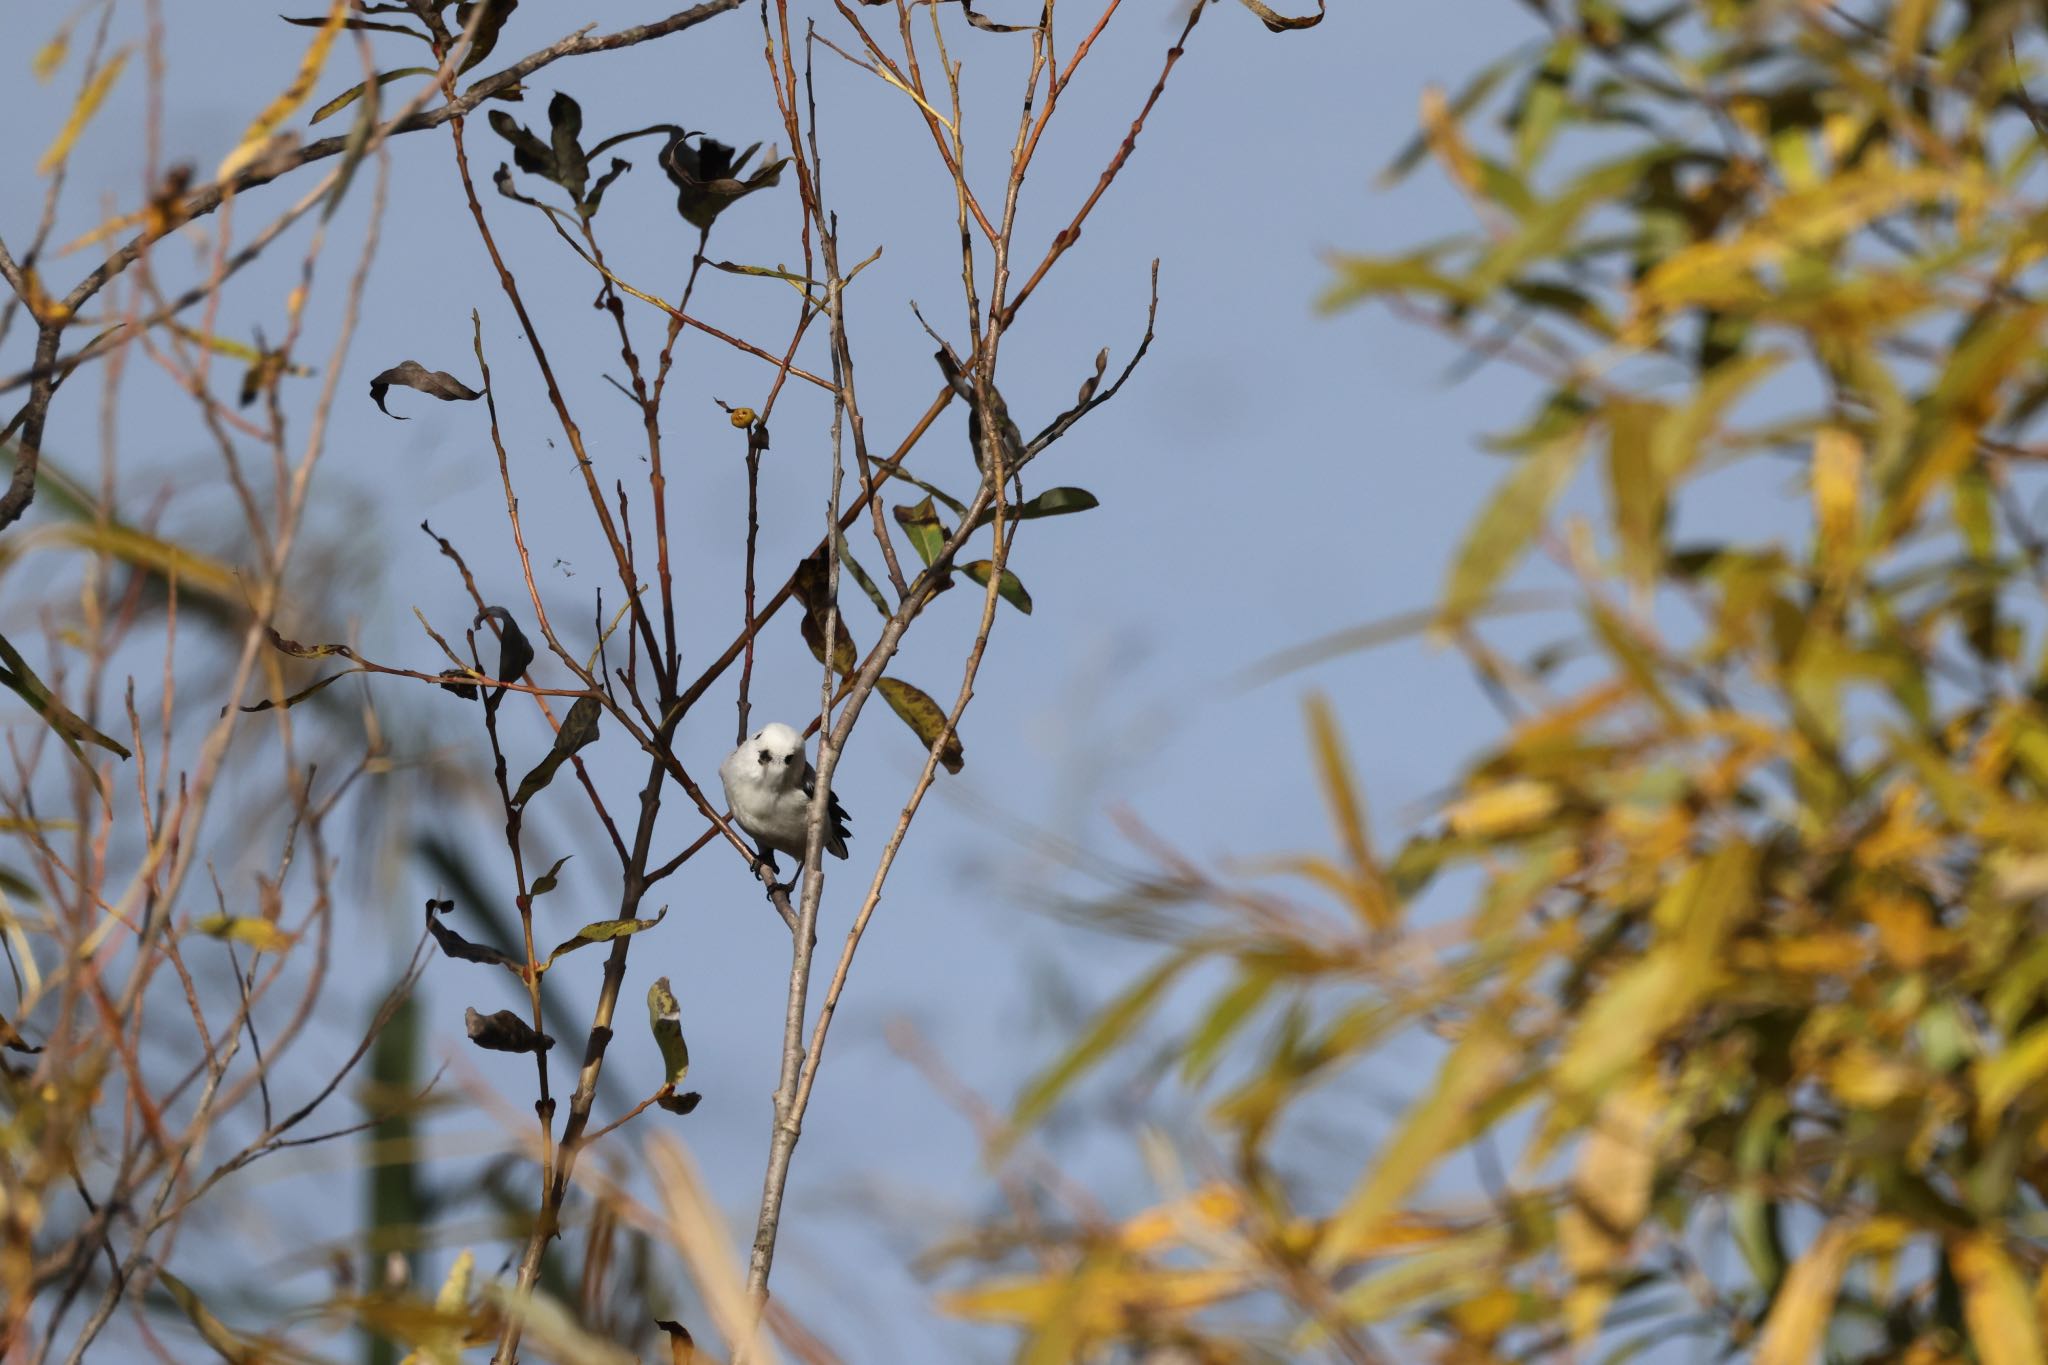 Photo of Long-tailed tit(japonicus) at 札幌モエレ沼公園 by will 73